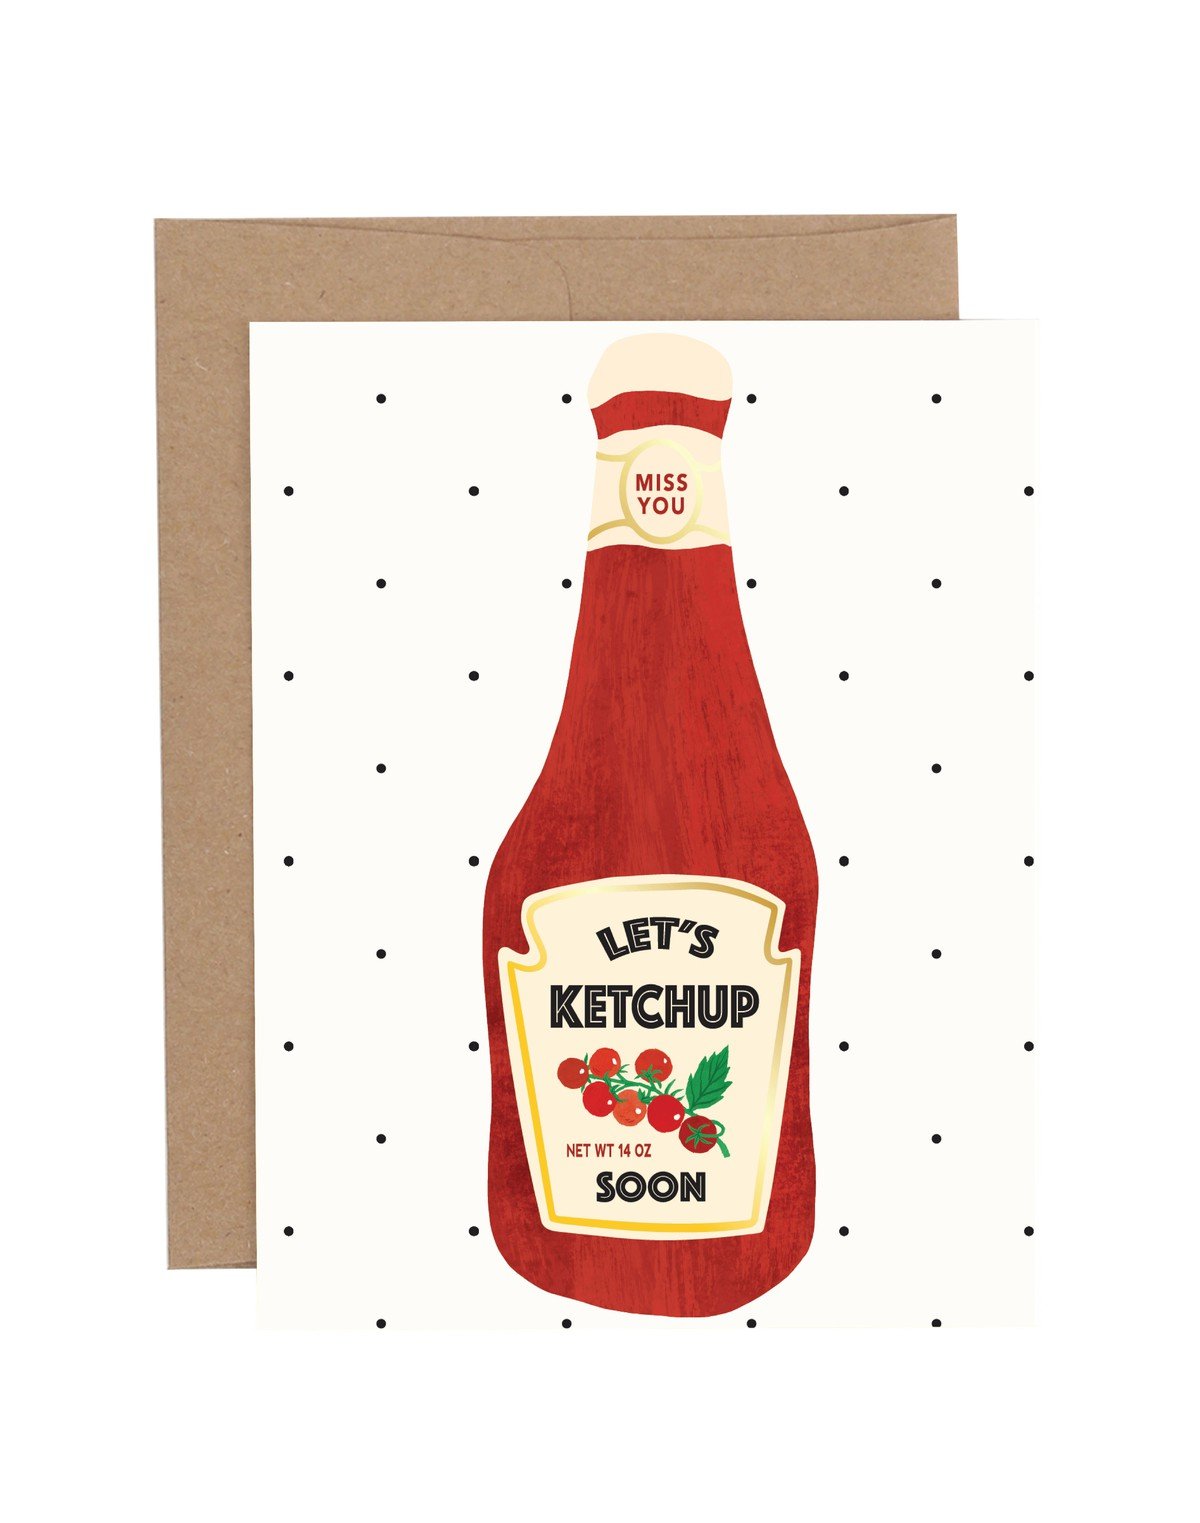 Miss You Ketchup Bottle Tomato Greeting Card item